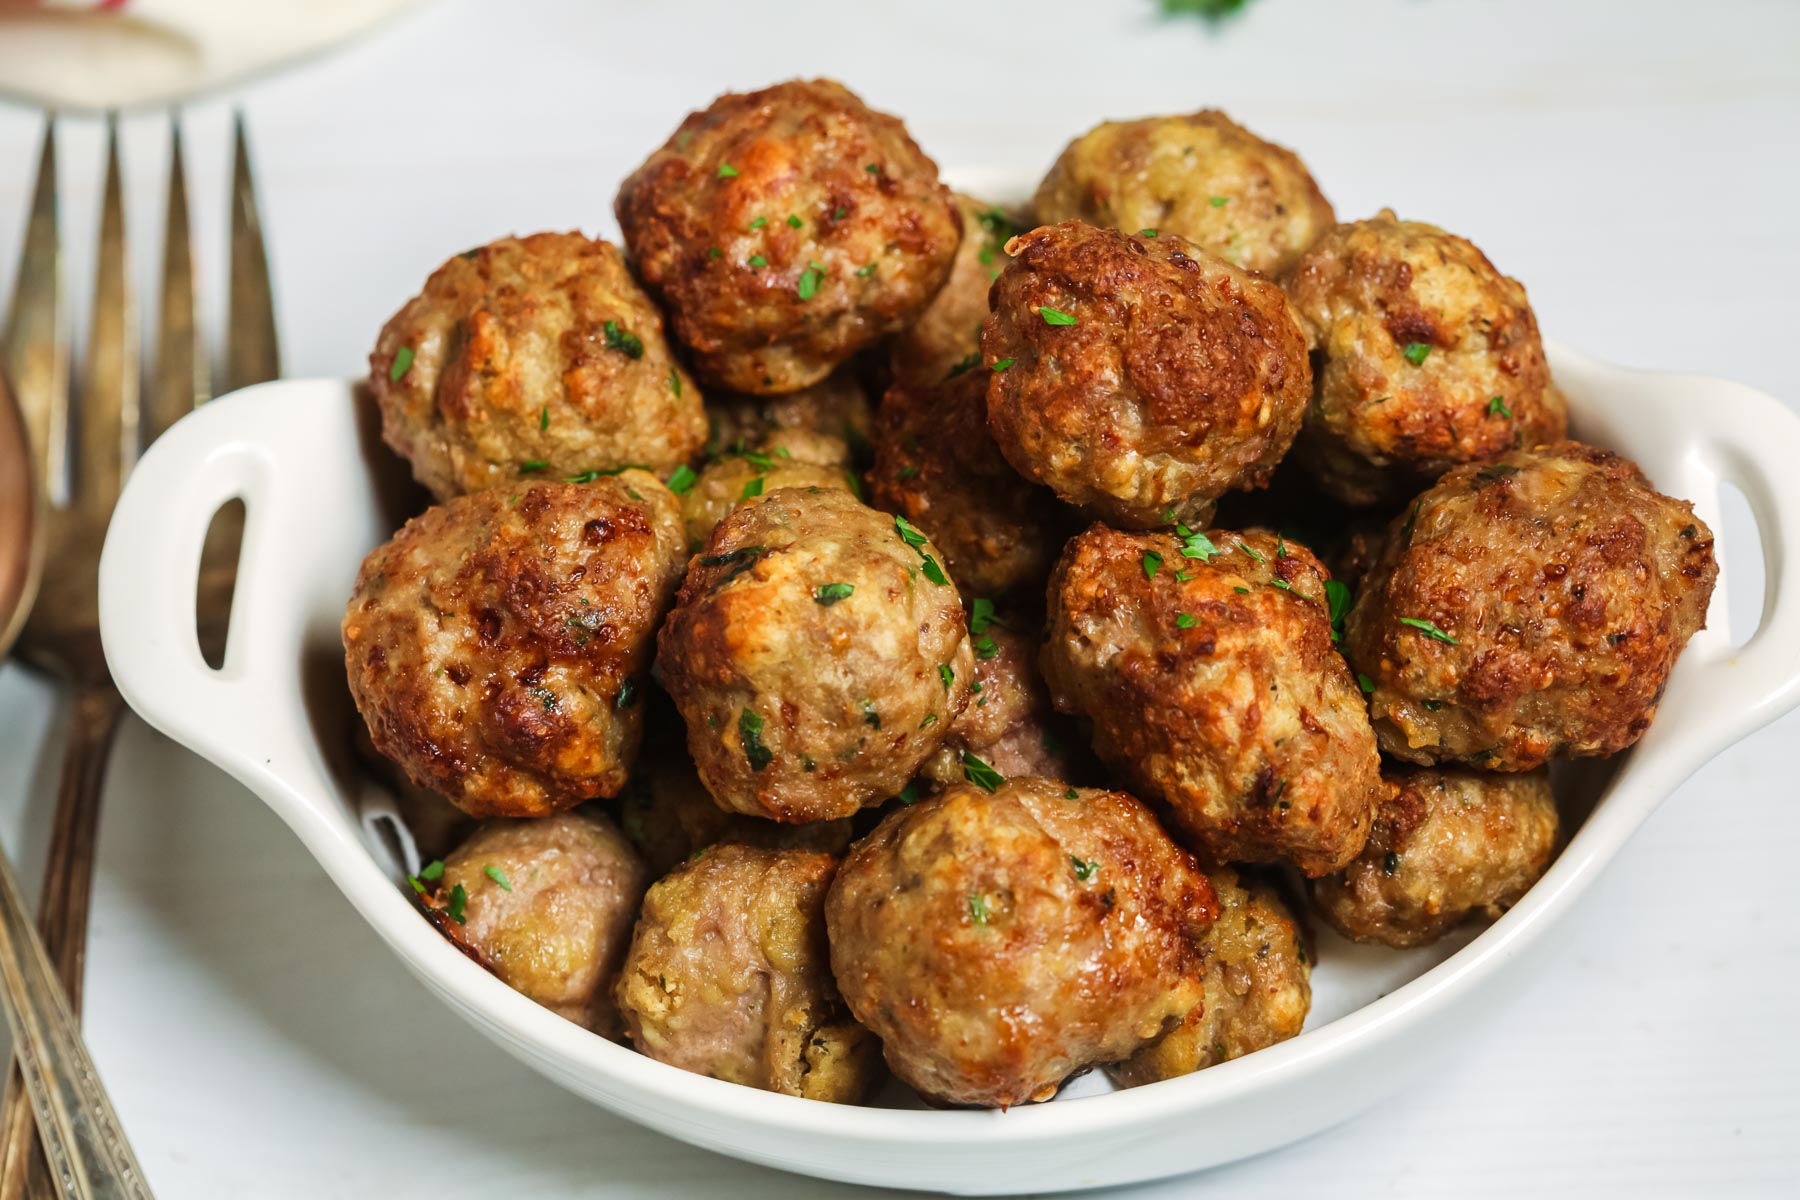 A stack of the AIr fryer meatballs.